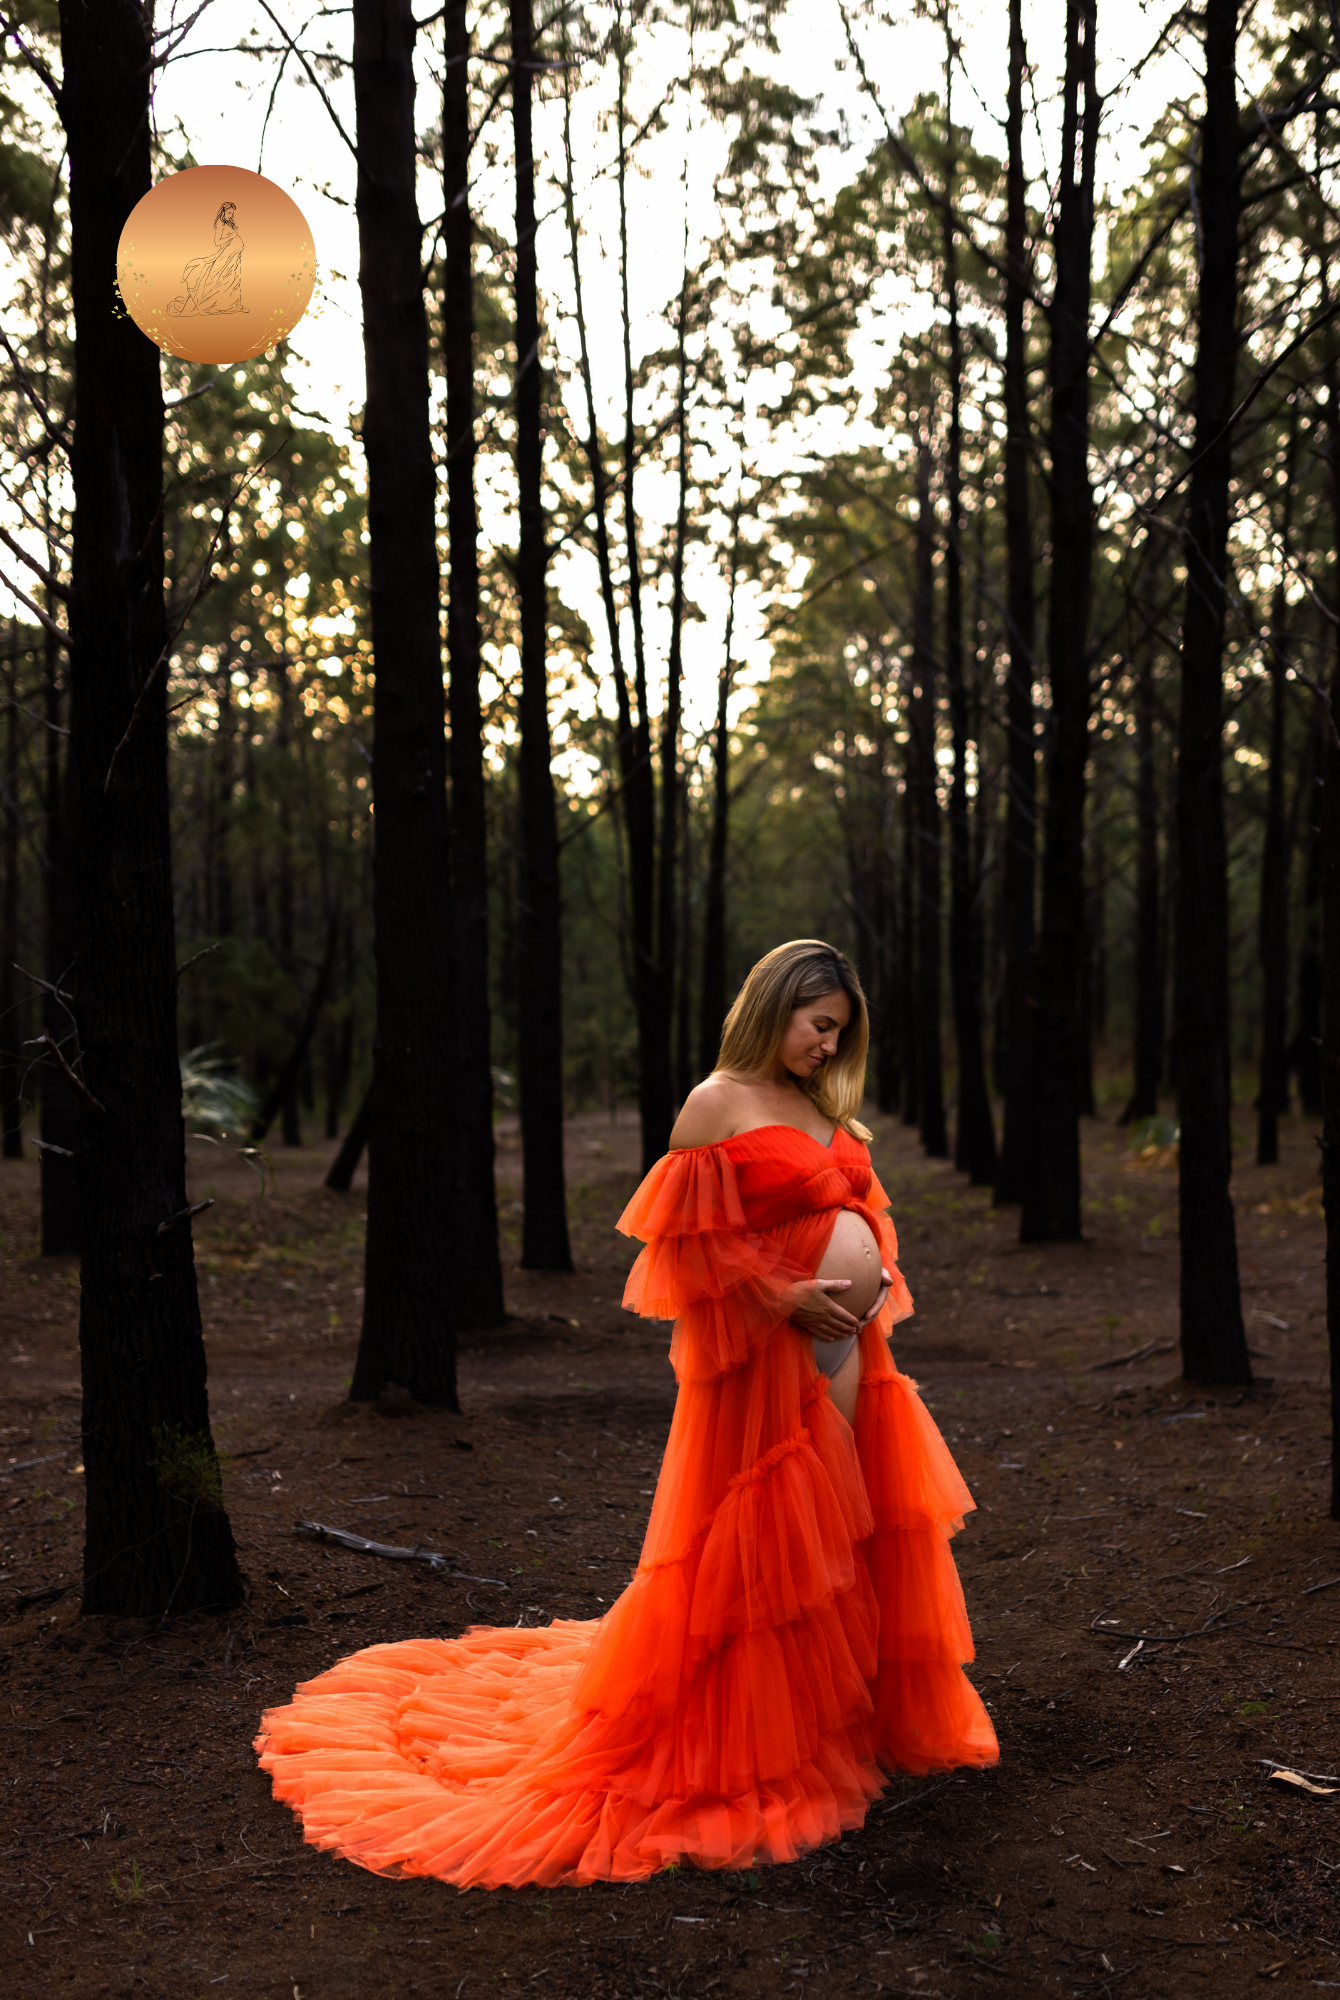 lace maternity dress for photoshoot